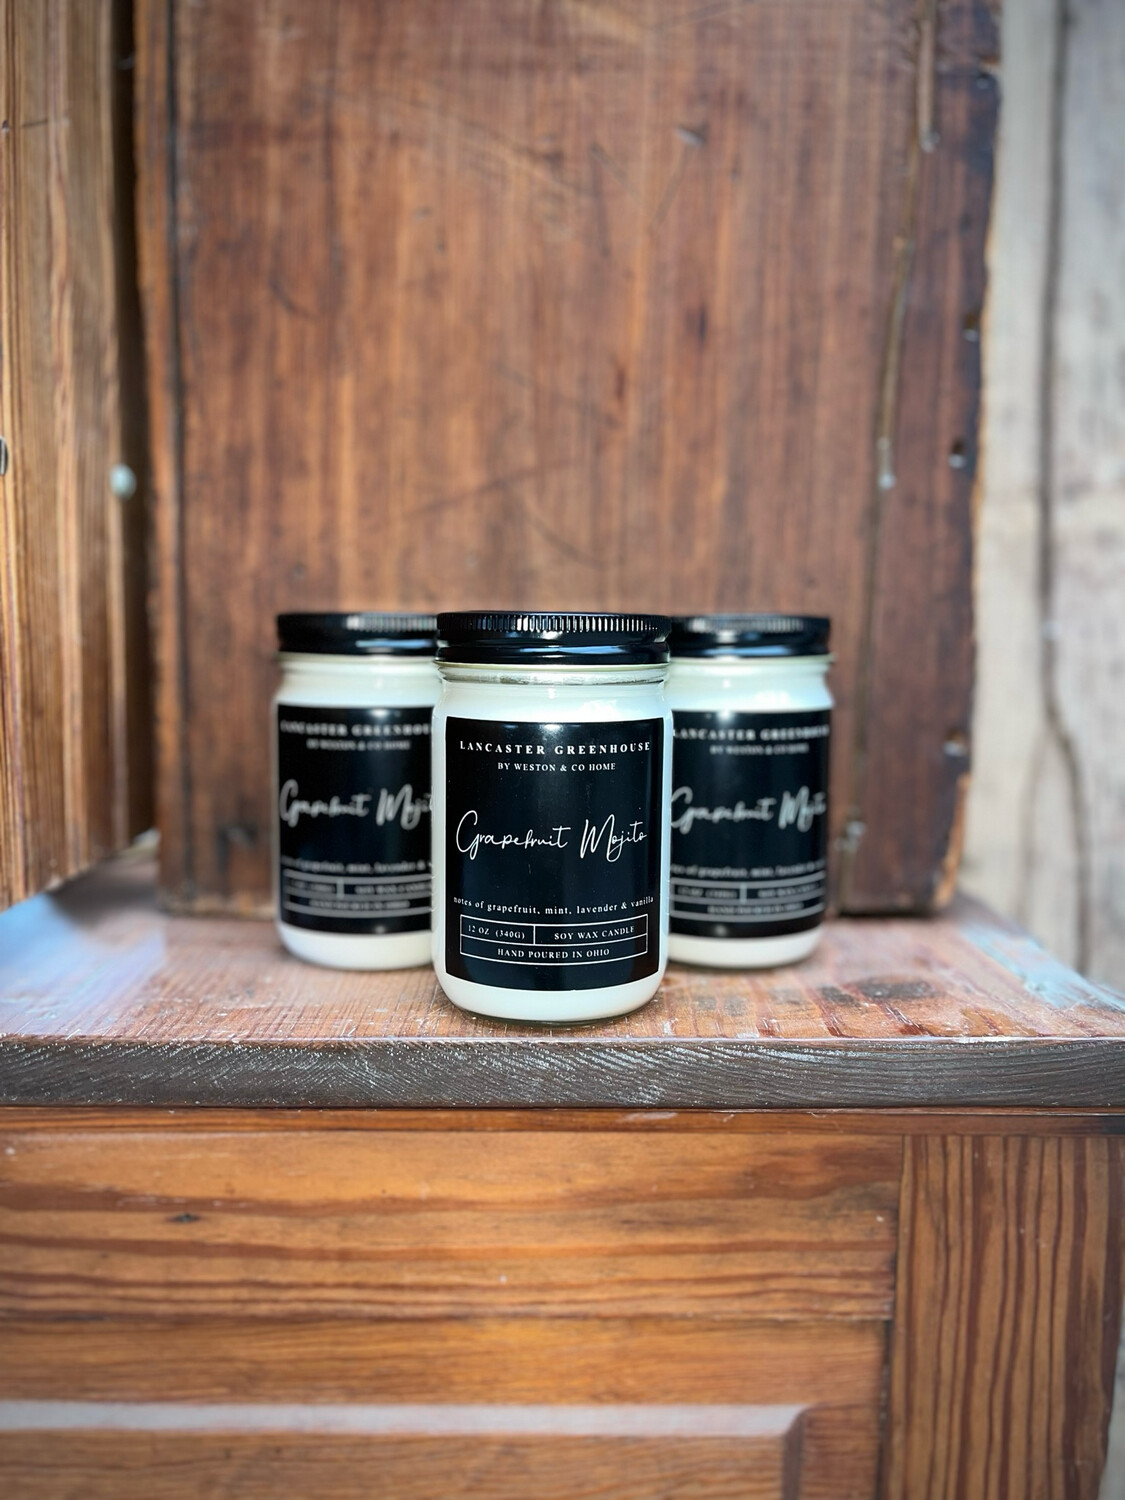 Soy Candle Grapefruit Mojito Scent (12 oz jar) $16.50